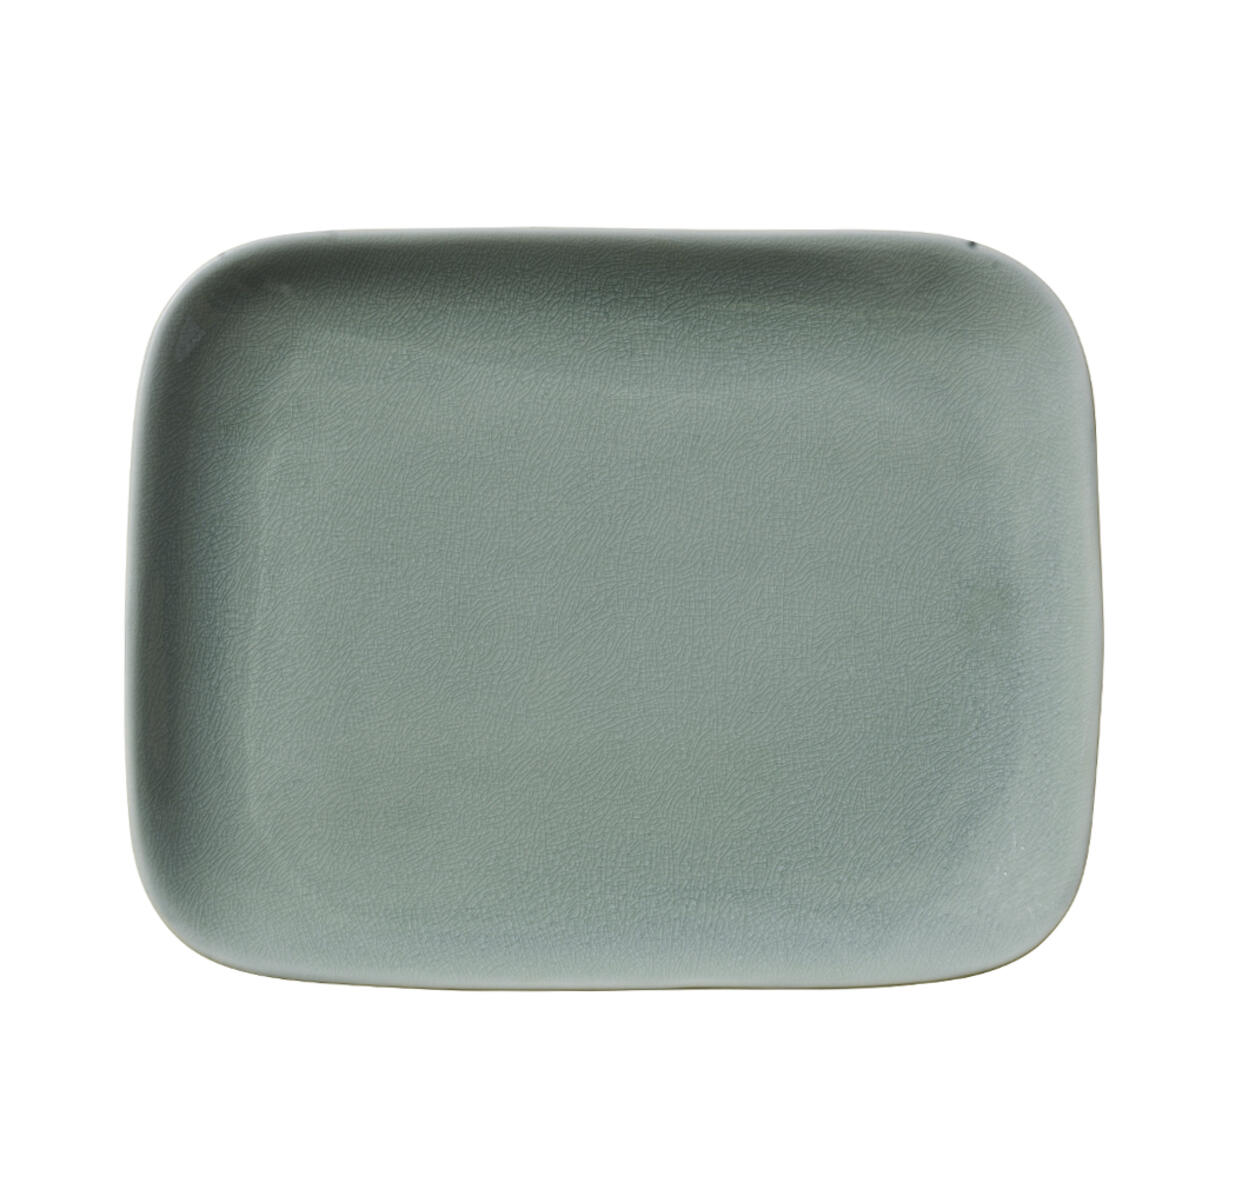 rectangle-maguelone-gris-cachemire-962031